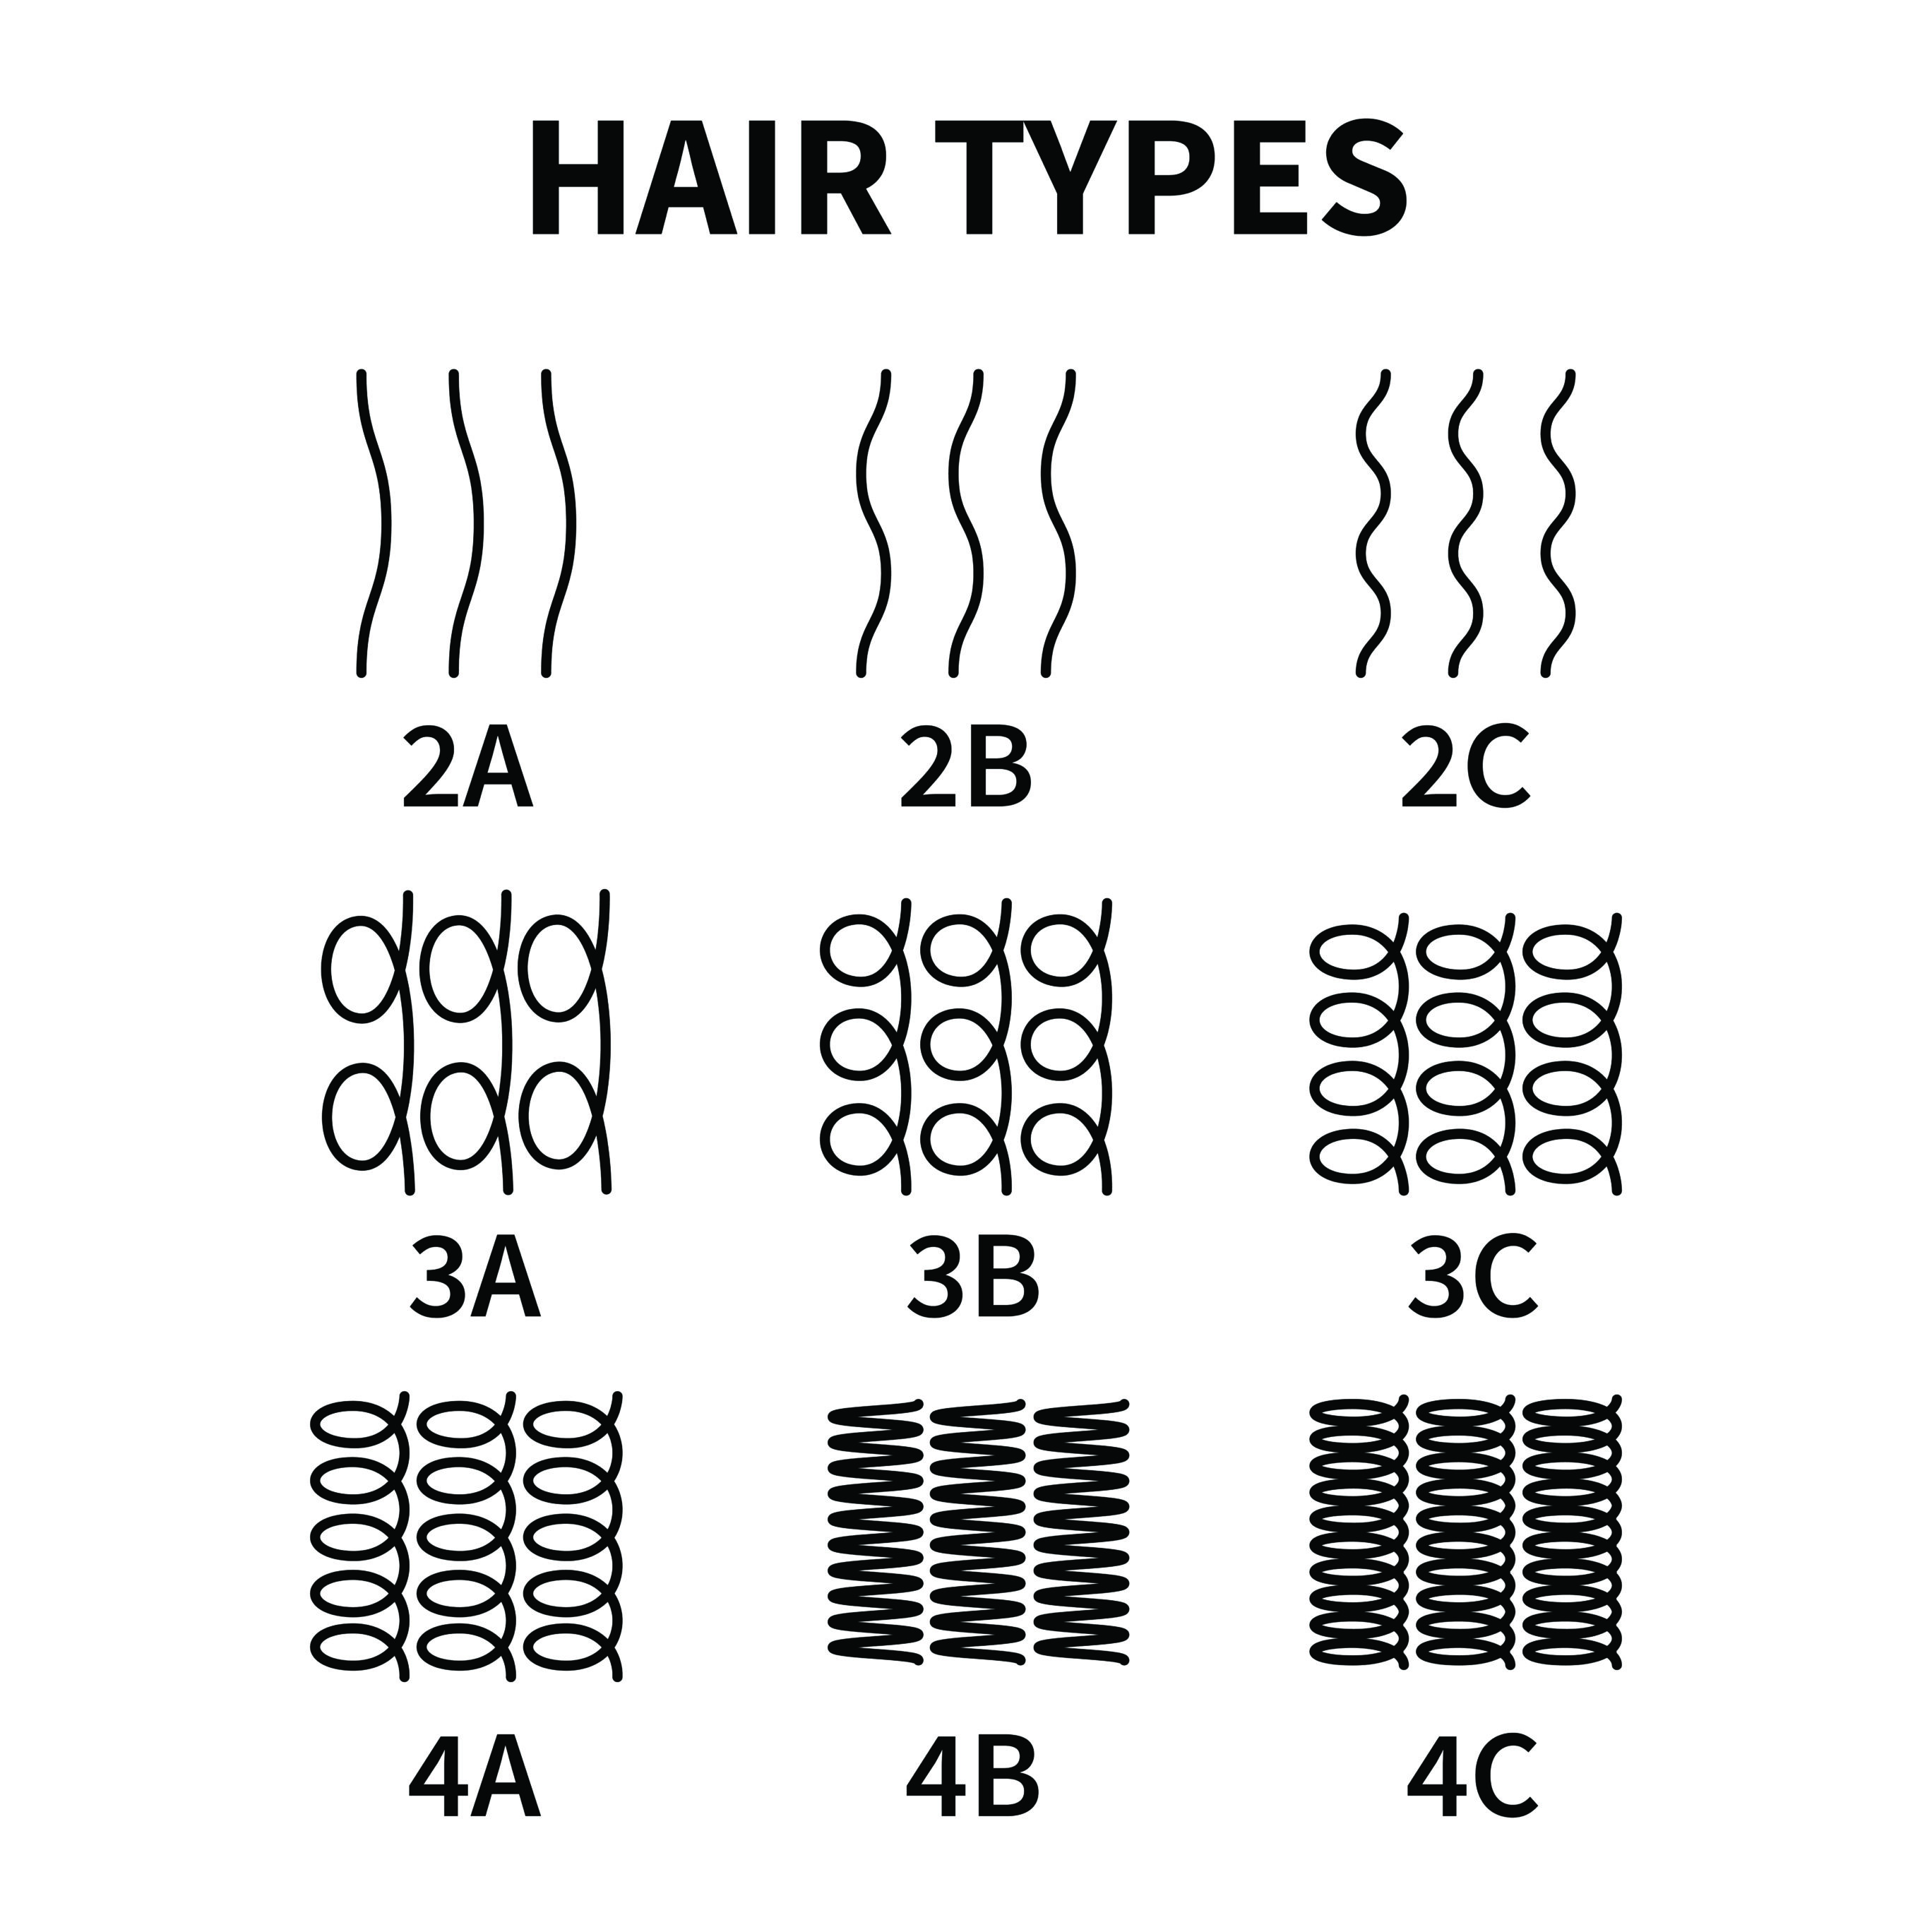 Mexican's curly hair belongs to the type 2, 3 hair type 4 hair